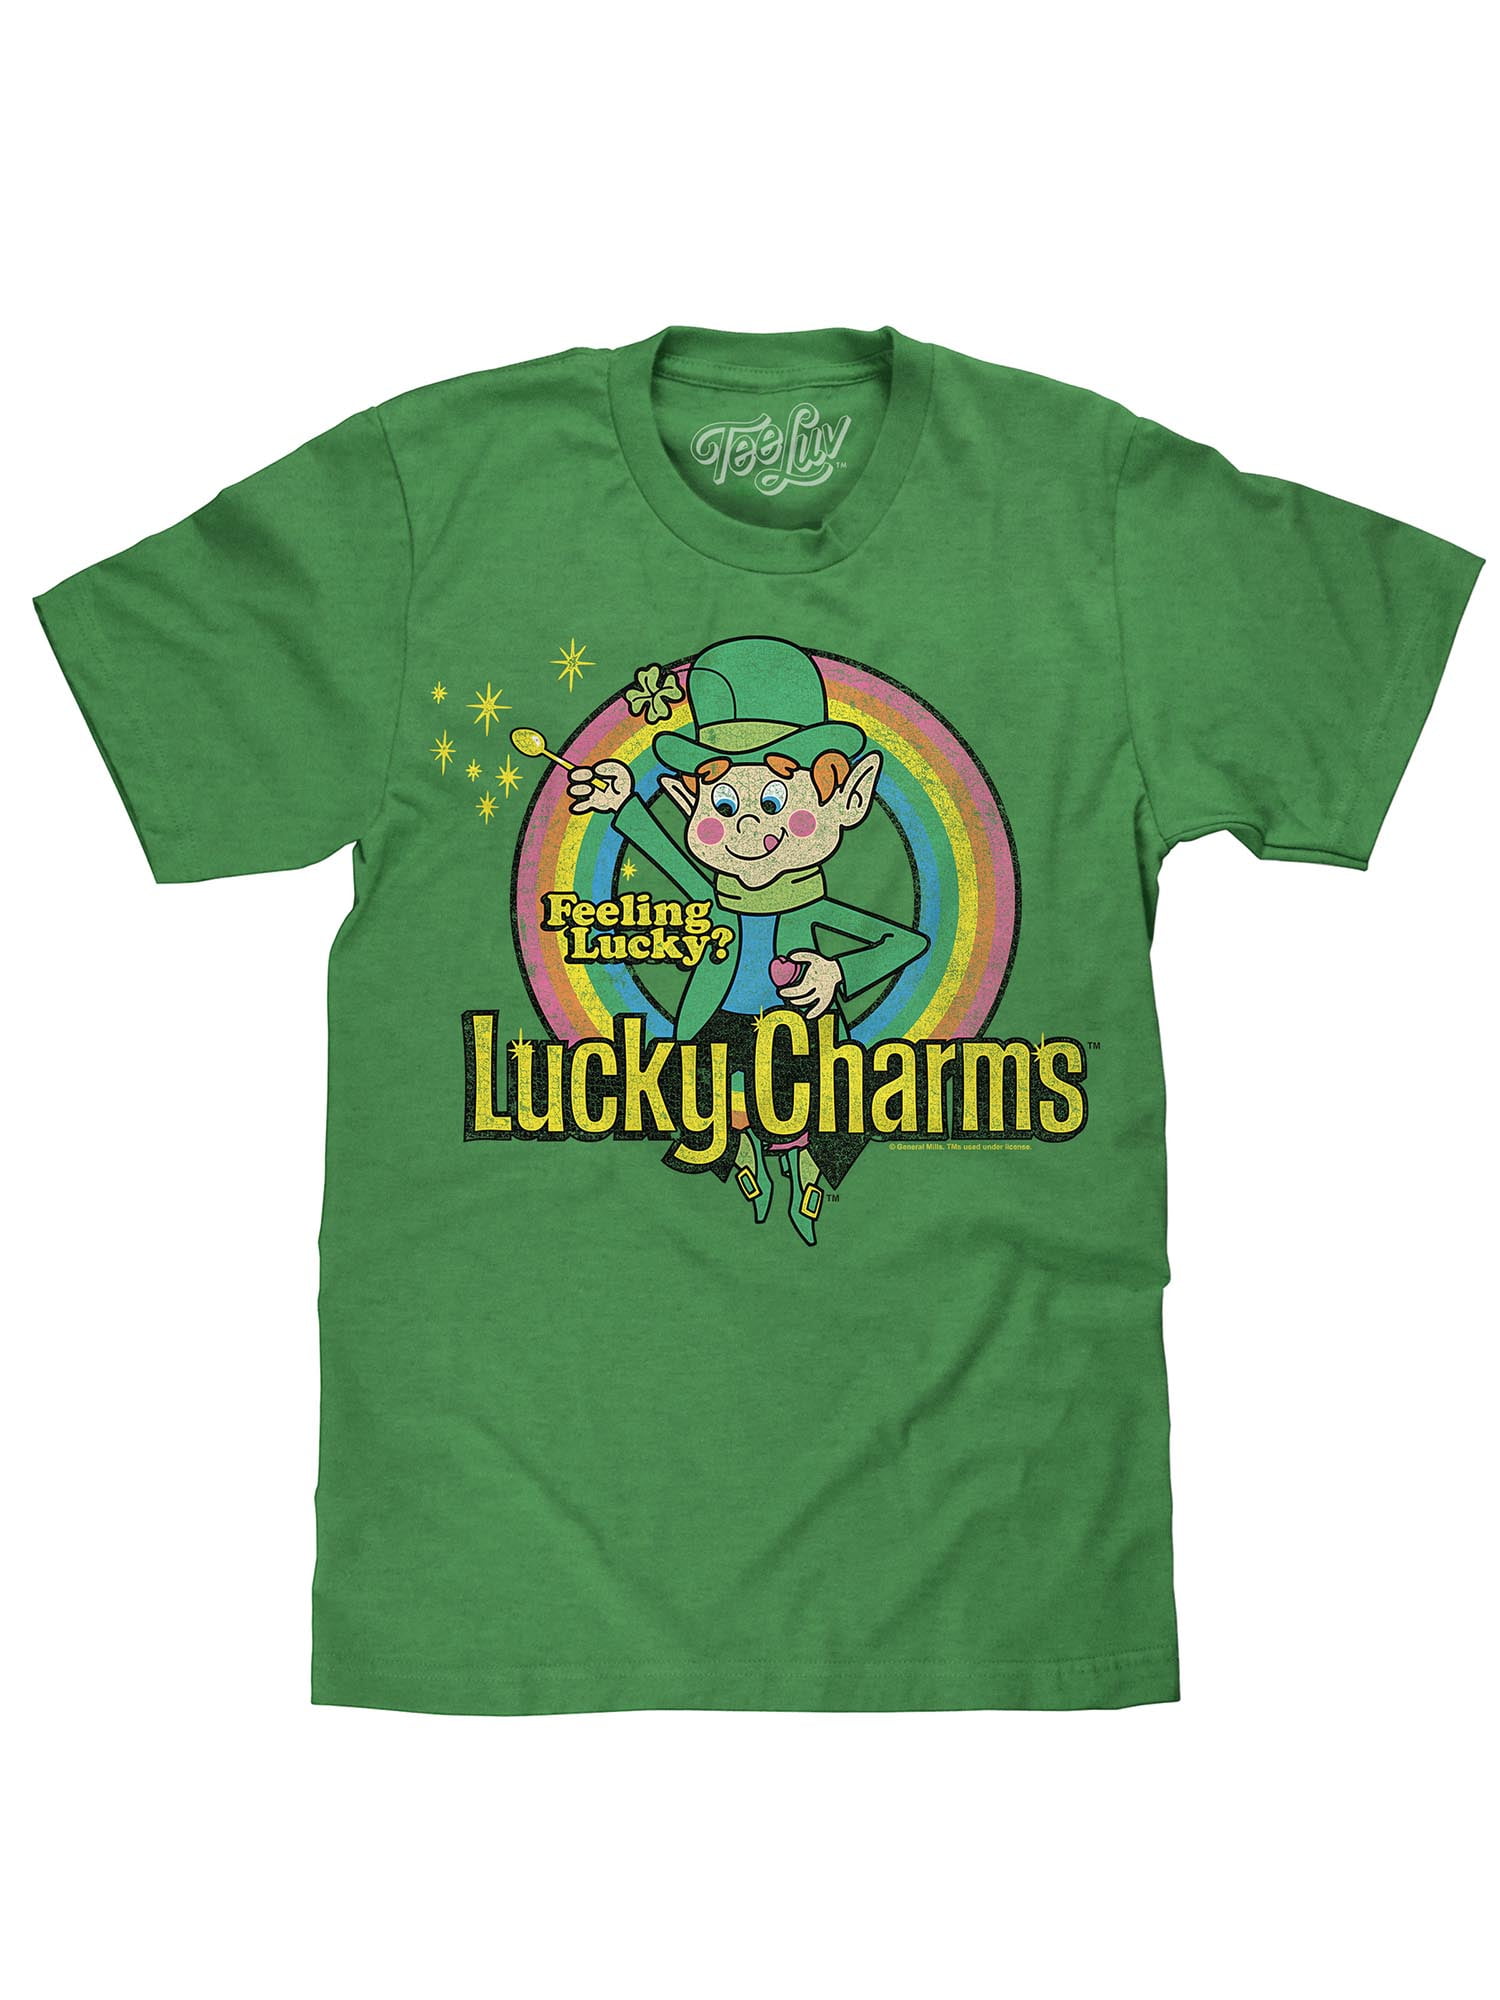 LUCKY CHARMS-Large Green Tee Shirt Vintage 90's-Feeling Lucky Lucky Charms Cereal-St Patrick's Day Shirt Sarcastic Humor